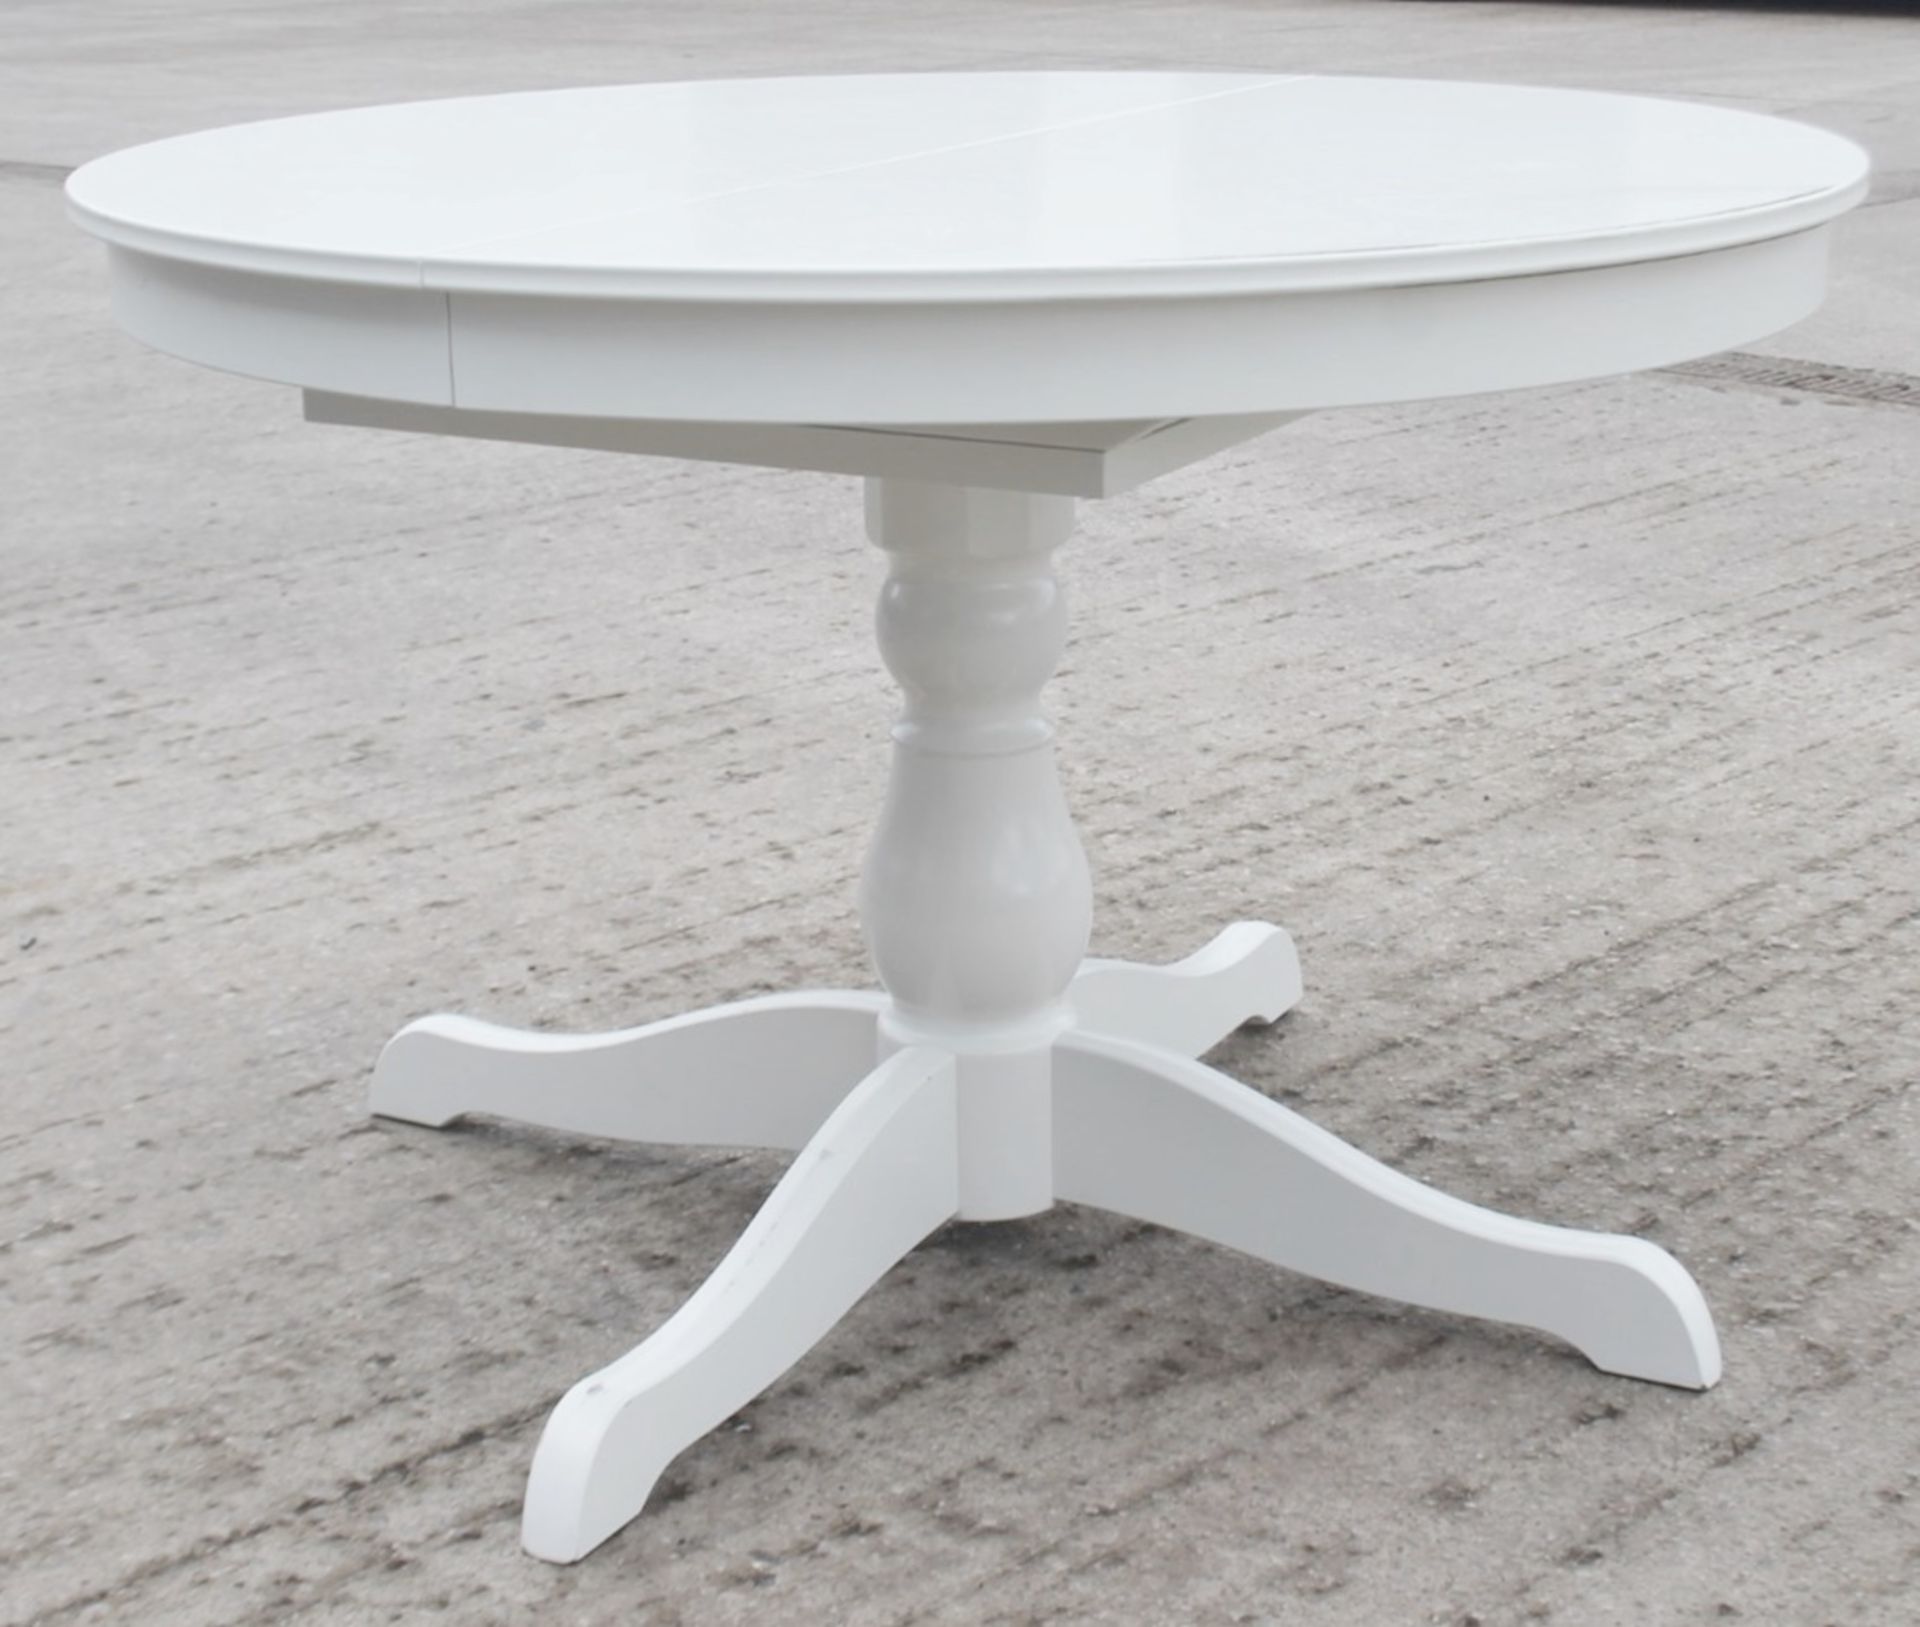 1 x Round Extending Wooden Table In White - Recently Relocated From An Exclusive Property - Ref: - Image 5 of 5